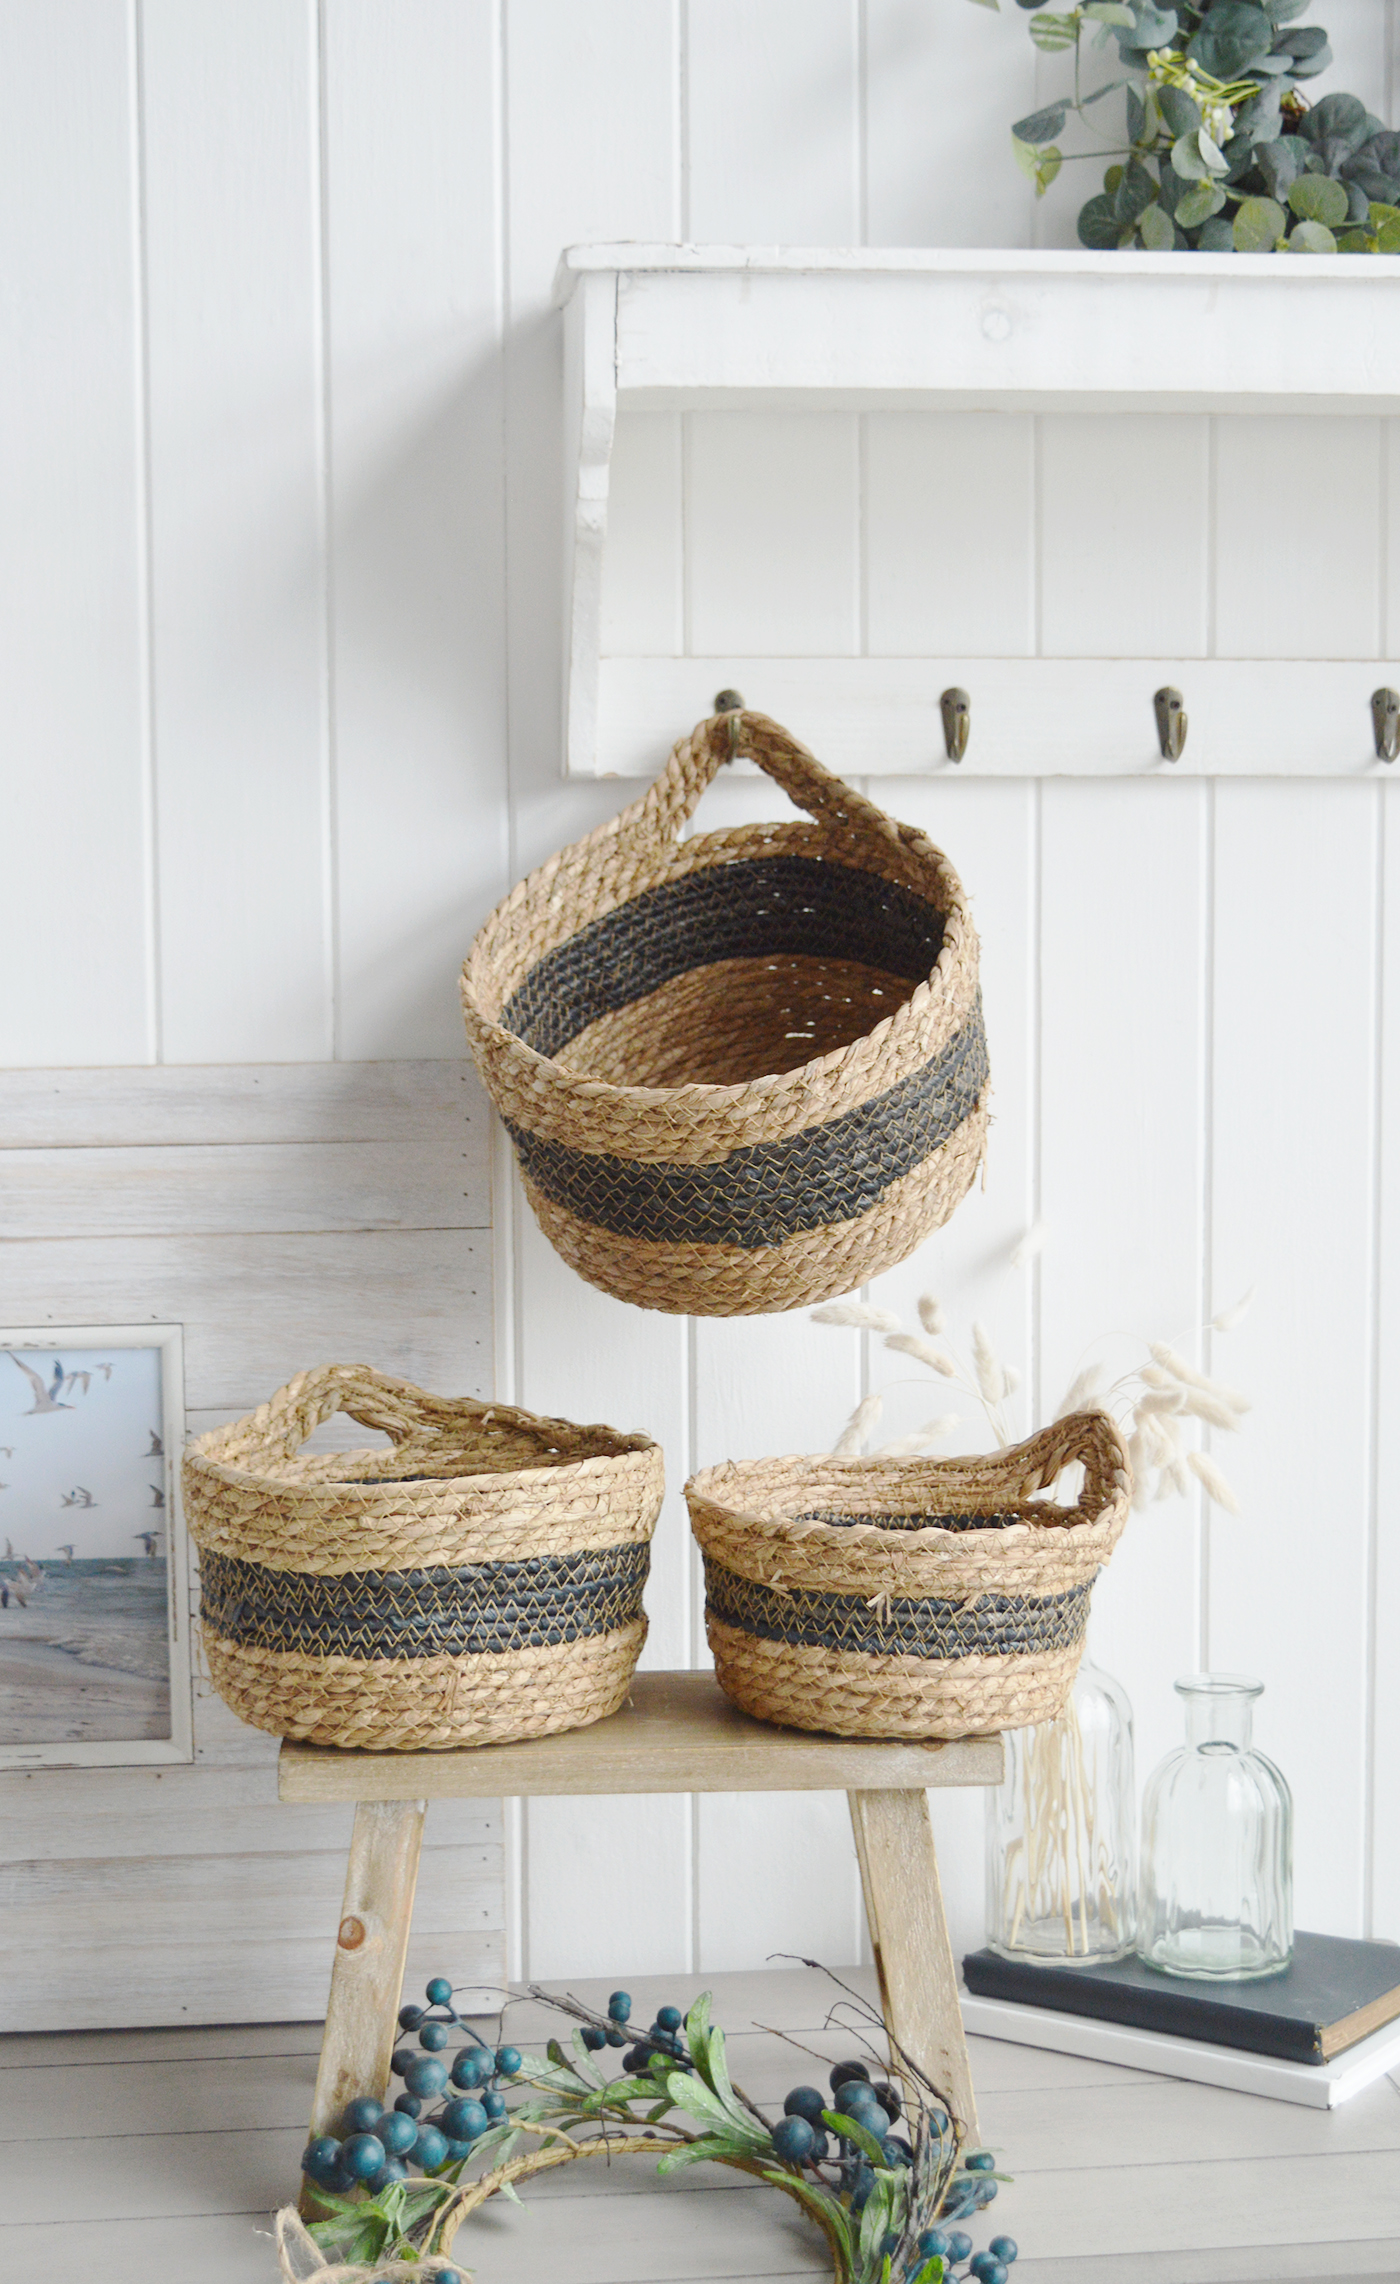 Newington Set of 3 Baskets with handle for everyday storage from The White Lighthouse Furniture and Home Interiors for New England, country, coastal and city homes for hallway, living room, bedroom and bathroom